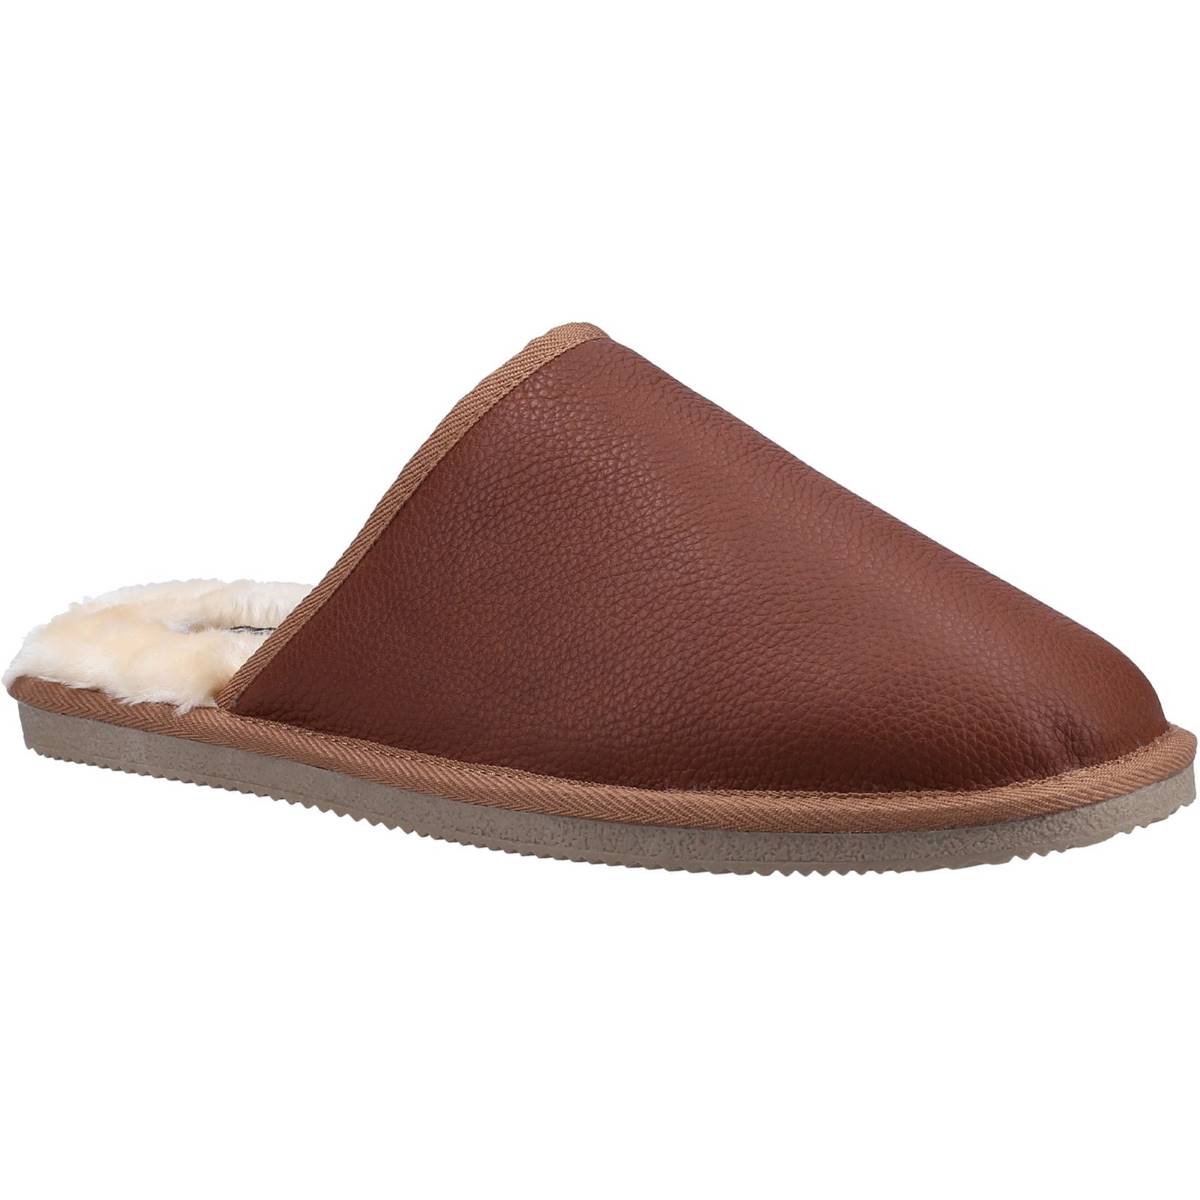 Hush Puppies Coady Leather Slipper Tan Mens slippers HPM2000-217-1 in a Plain Leather in Size 12